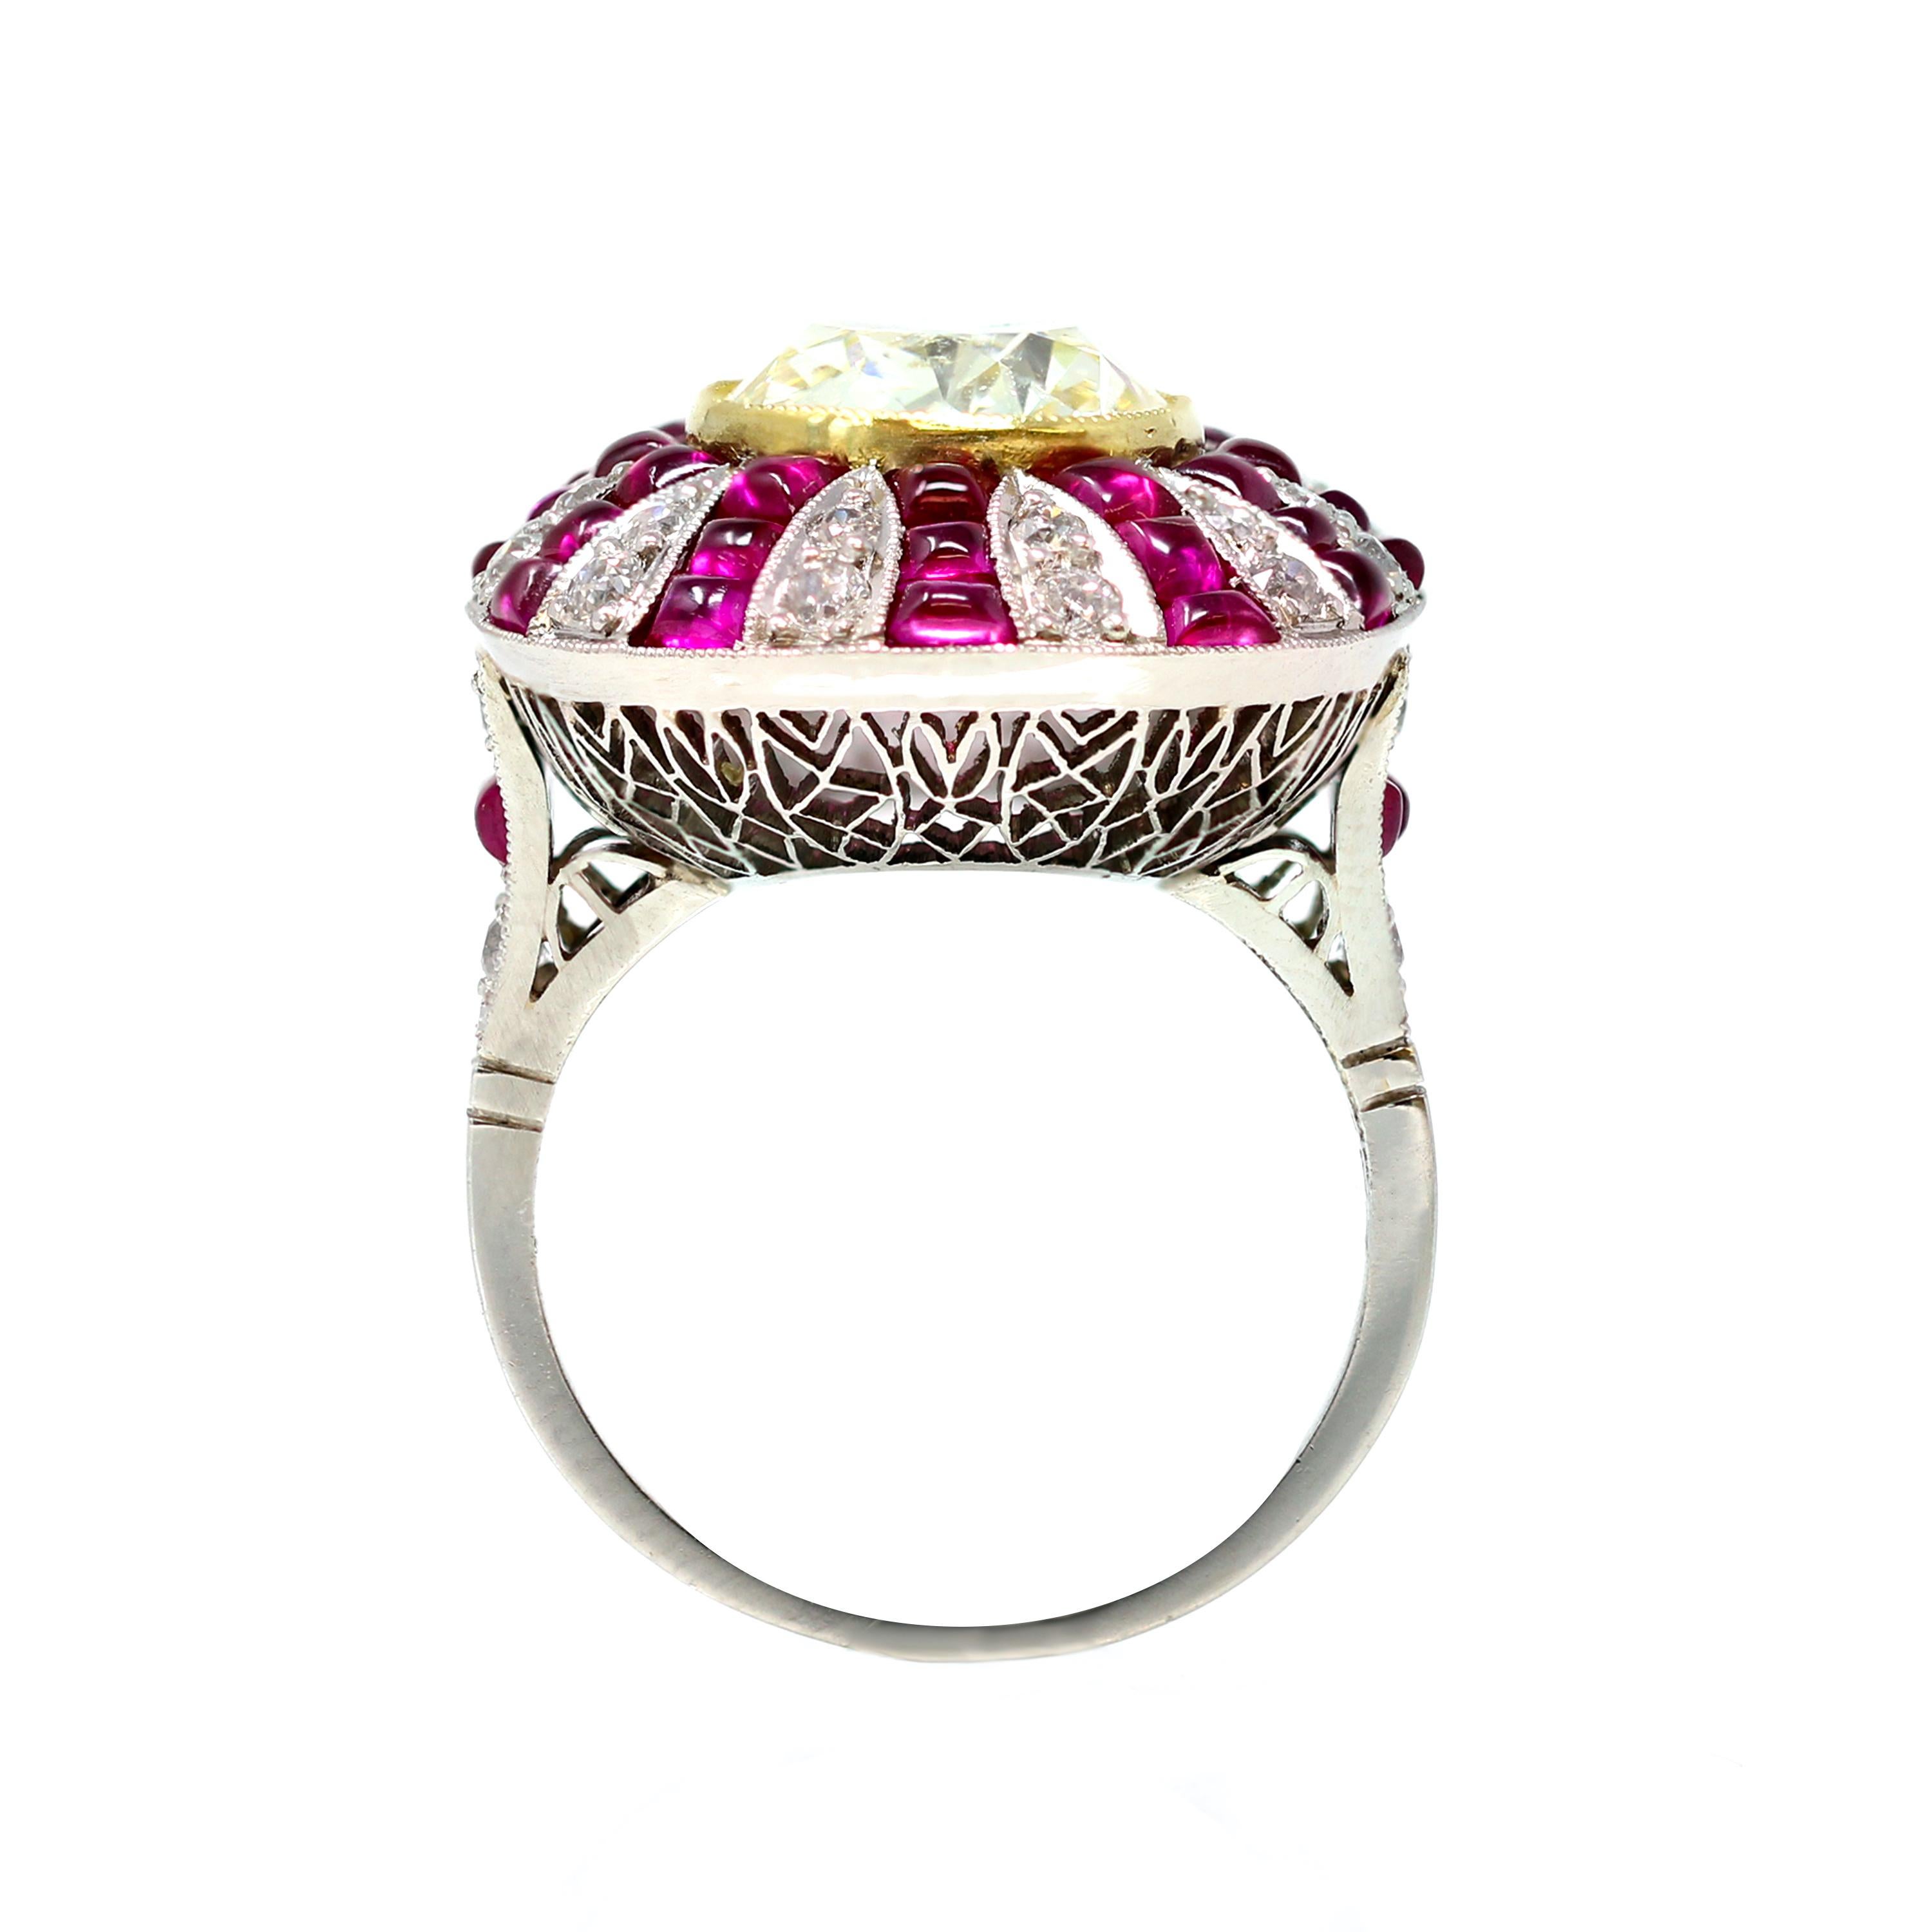 A stunning example of pure artistry for this Art Deco Style ring featuring a GIA certified Fancy yellow diamond weighing 4.73 carats skillfully adorned with cabochon rubies and old mine cut diamonds. This yellow fancy diamond and rubies cocktail